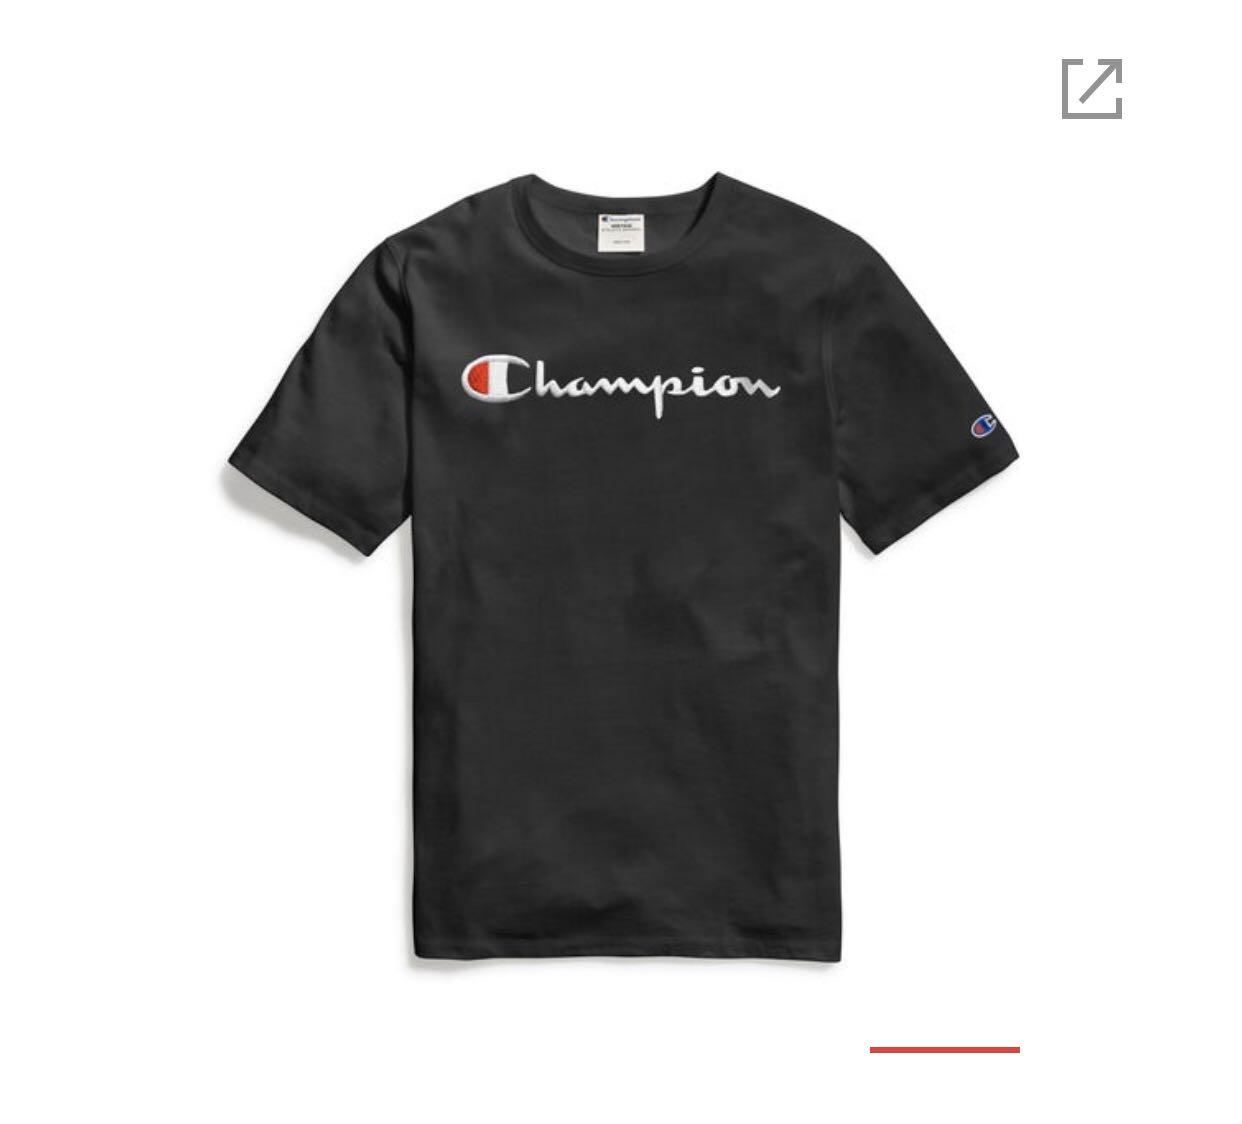 Authentic Champion Top Women S Fashion Tops Other Tops On Carousell